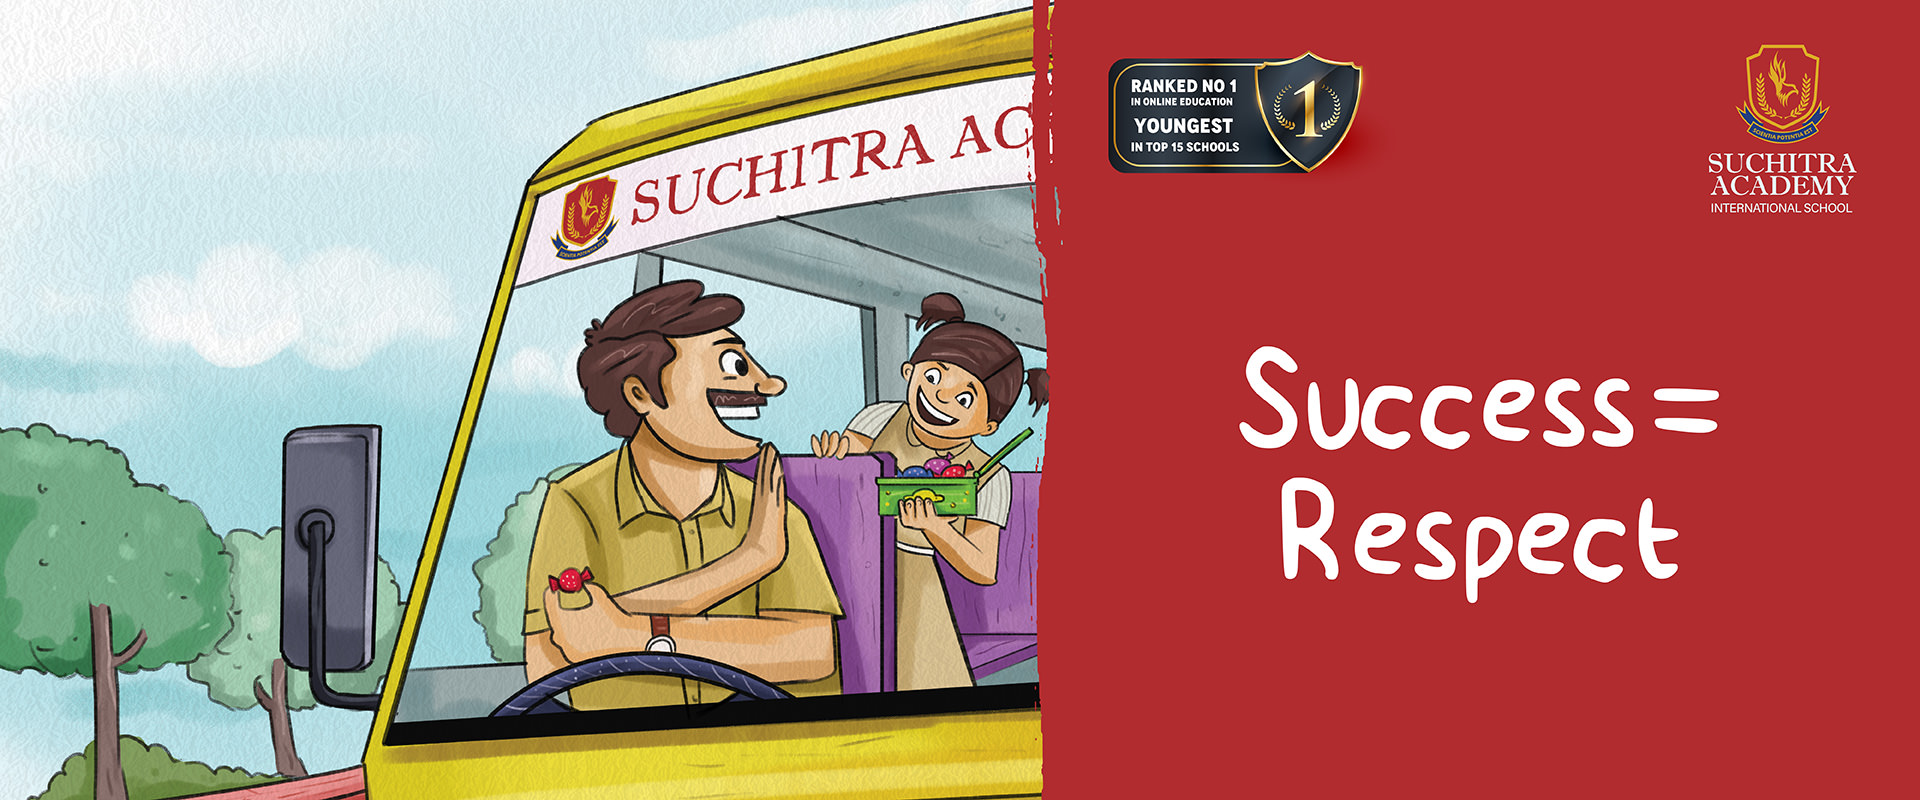 Admissions at Suchitra Academy